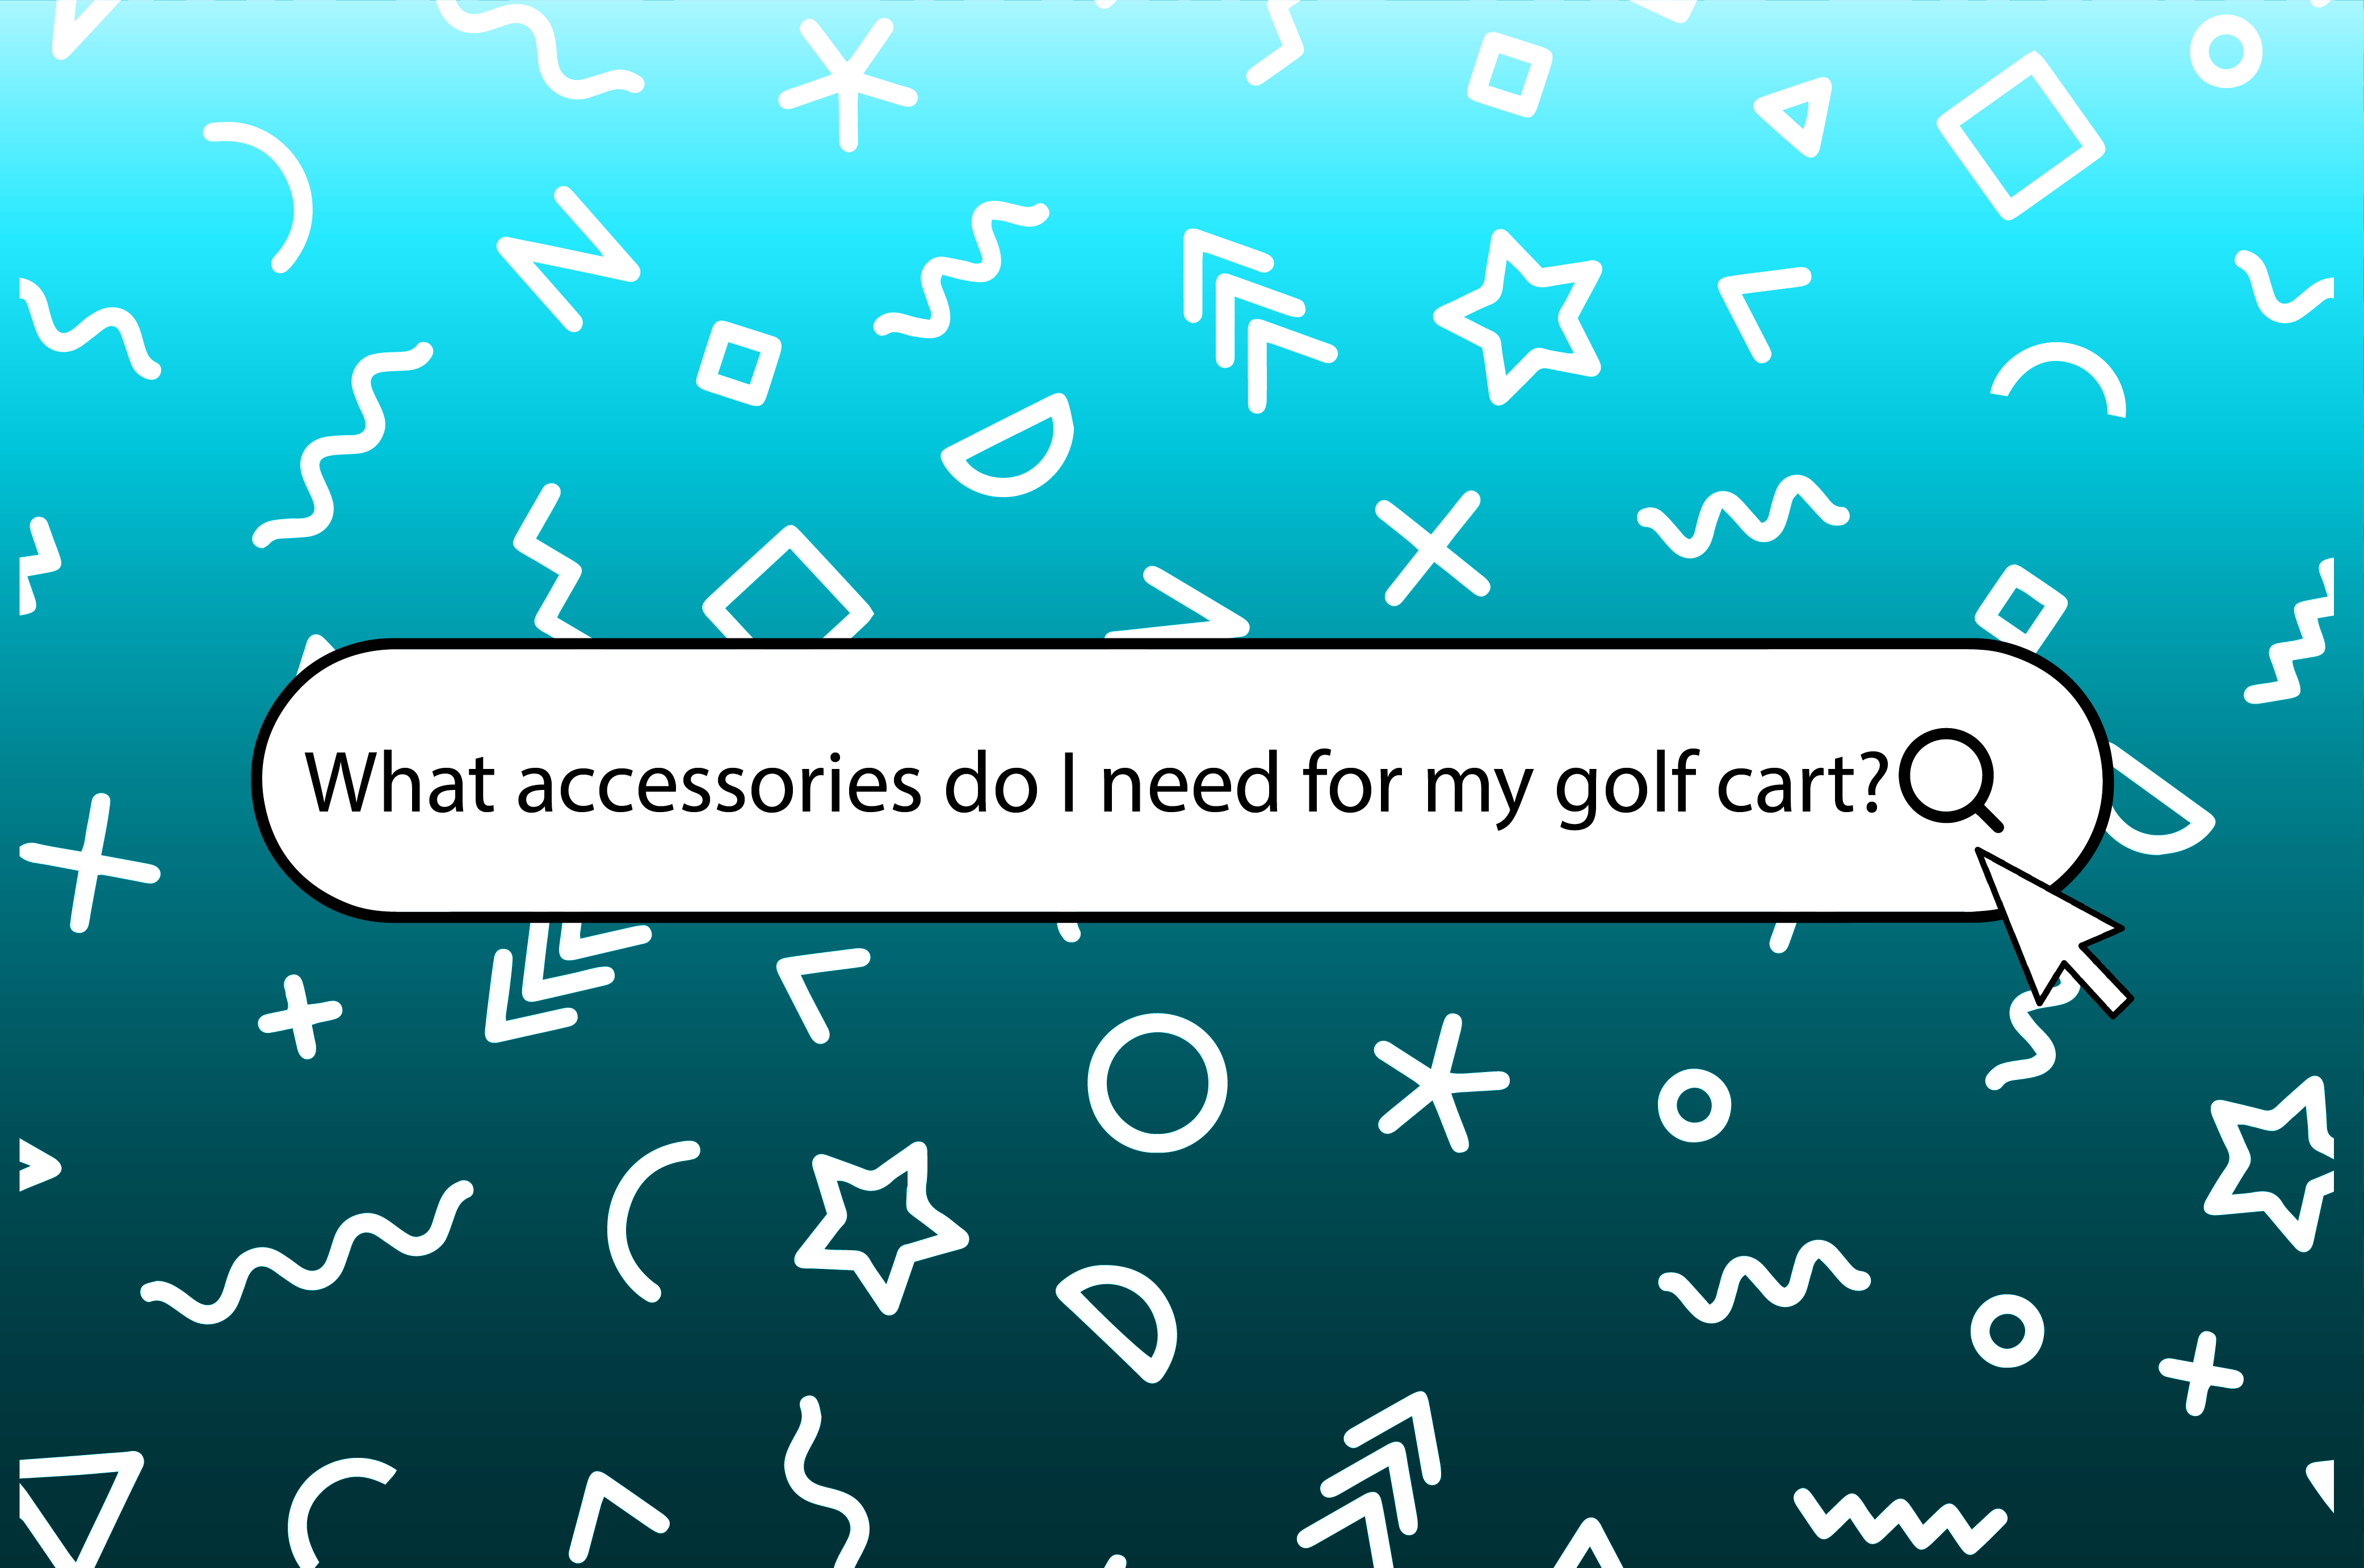 What accessories do I need for my golf cart?